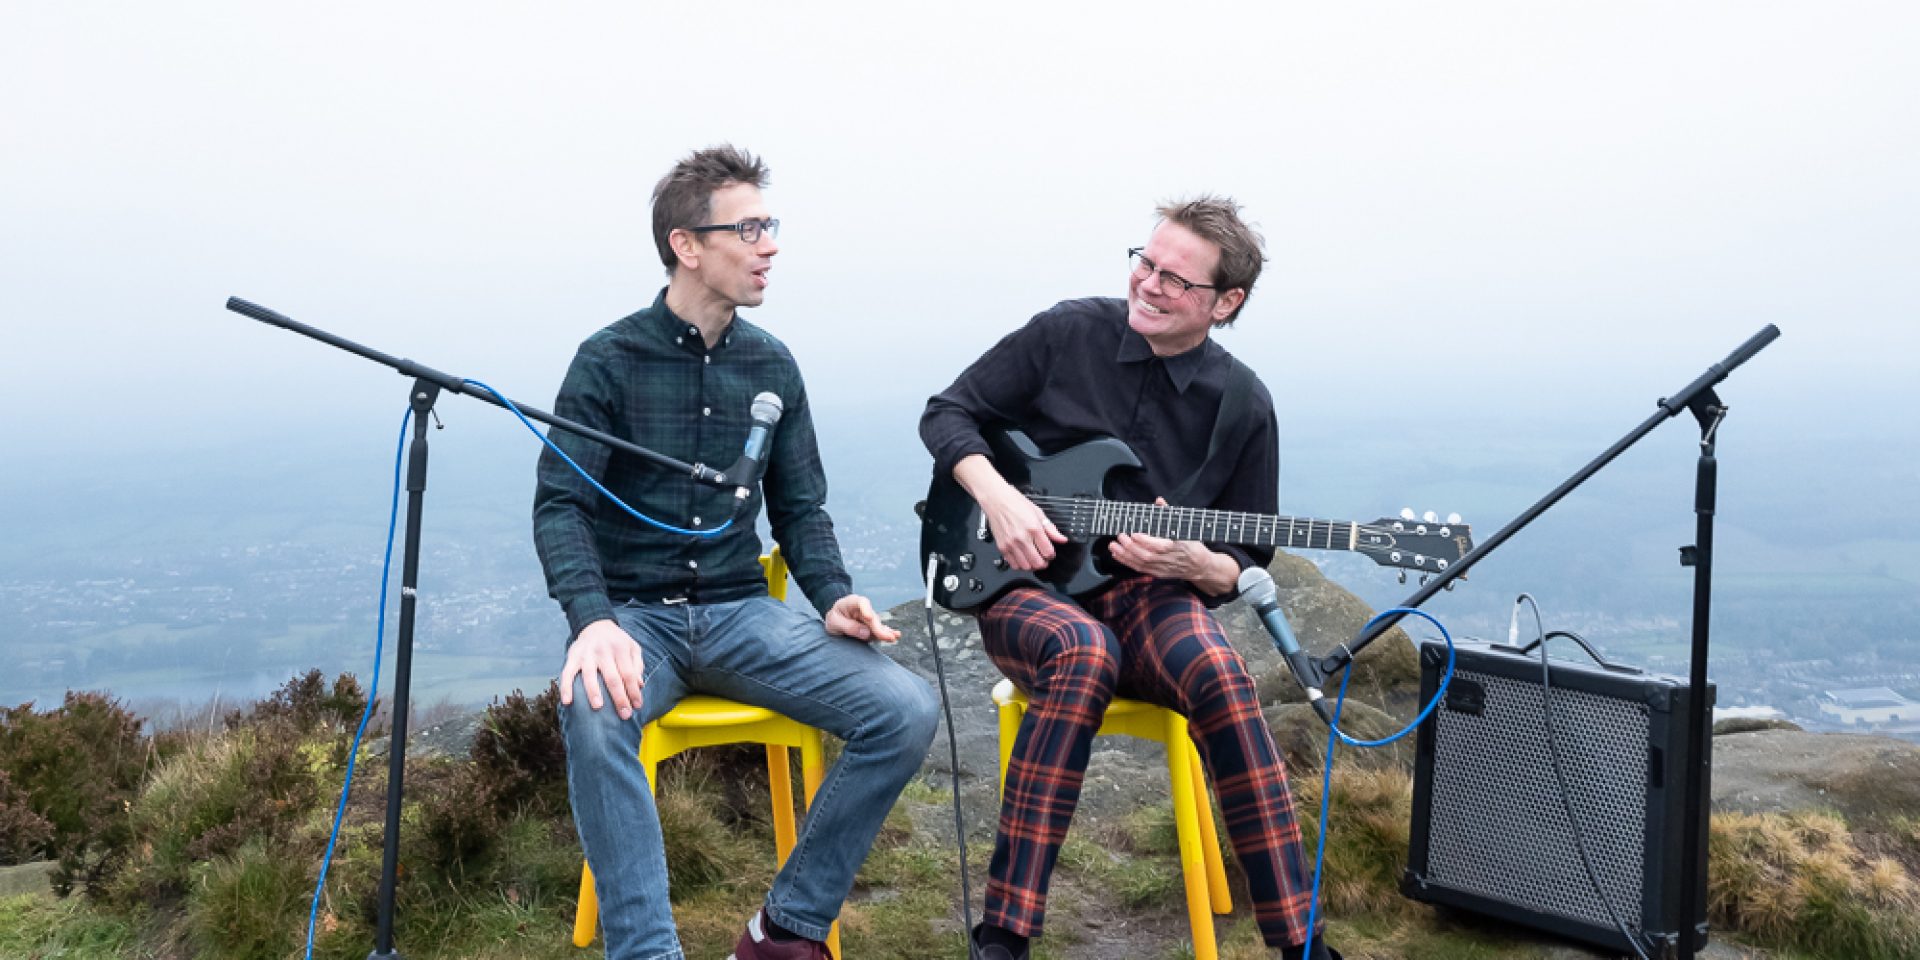 These Hills Are Ours: An interview with Daniel Bye and Boff Whalley